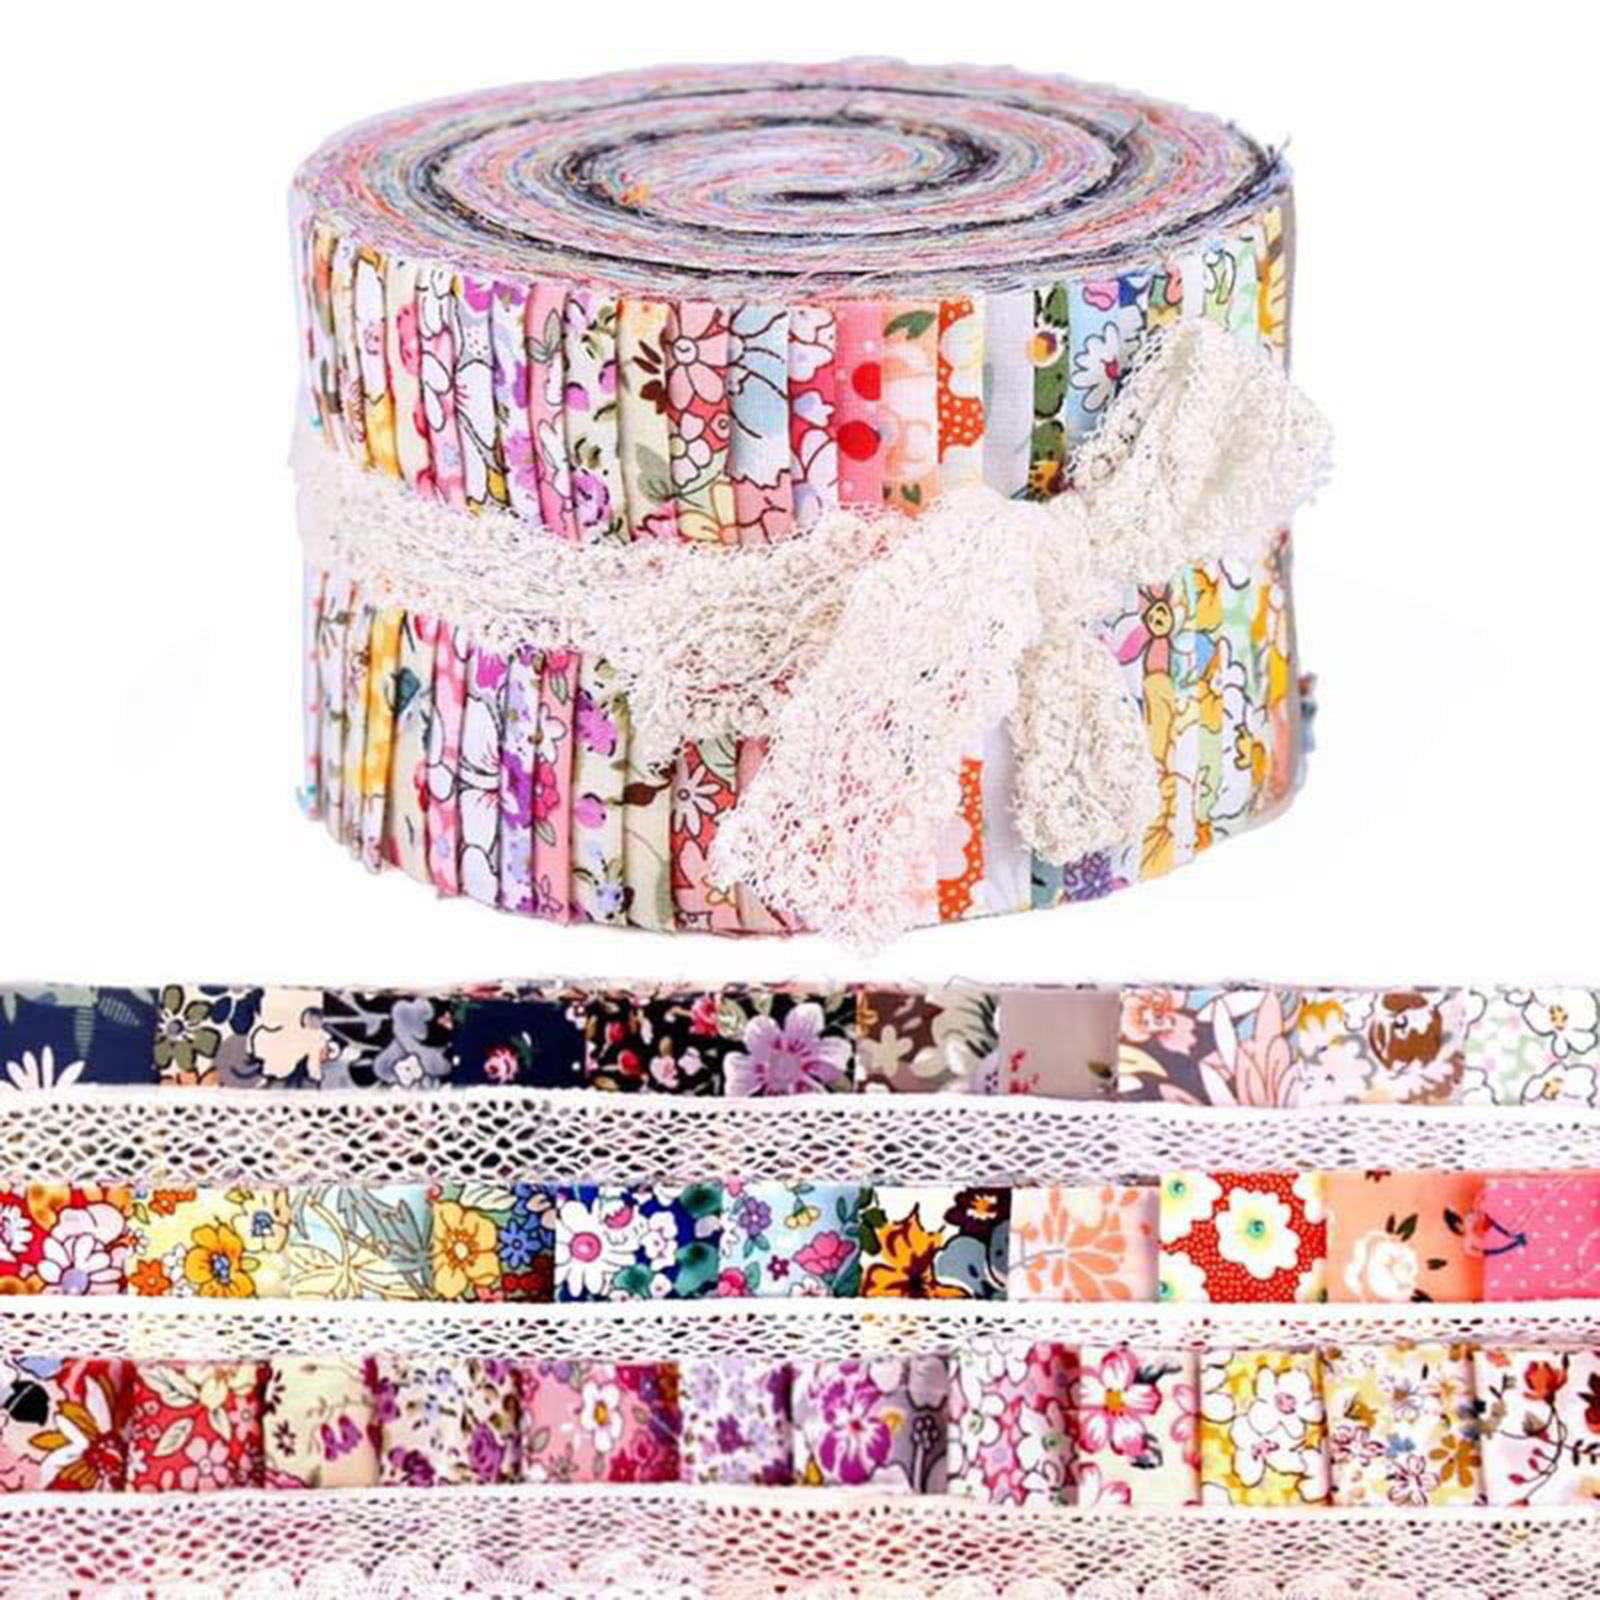 36Pcs Quilting Fabric Roll Clearance - Rich Bright Colors, Soft Pure  Cotton, Wide Application for Clothes, Tablecloth DIY - Jellyroll